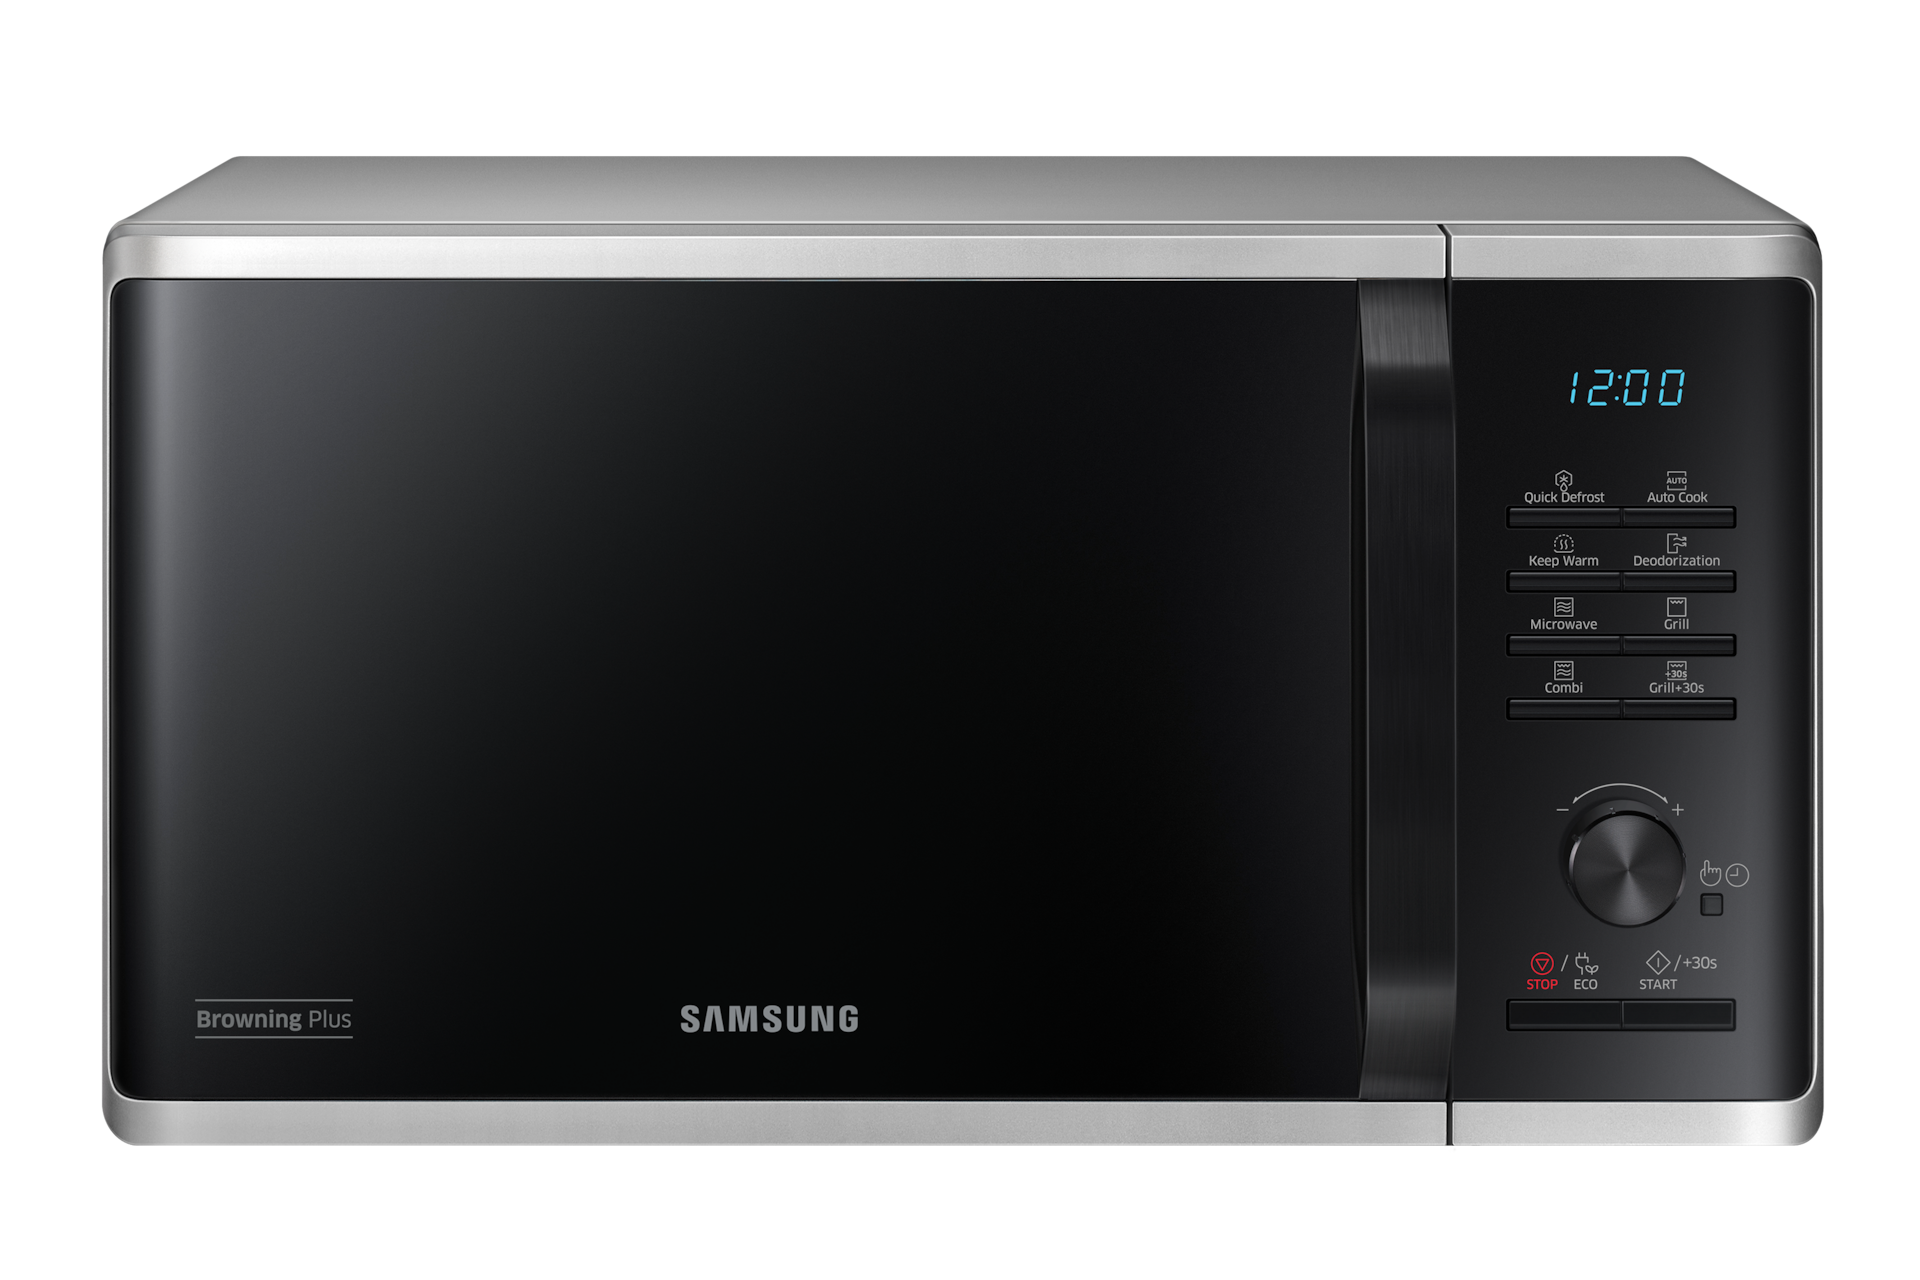 Samsung Micro-ondes Gril, 23L - MG23K3515AS, Cuisson